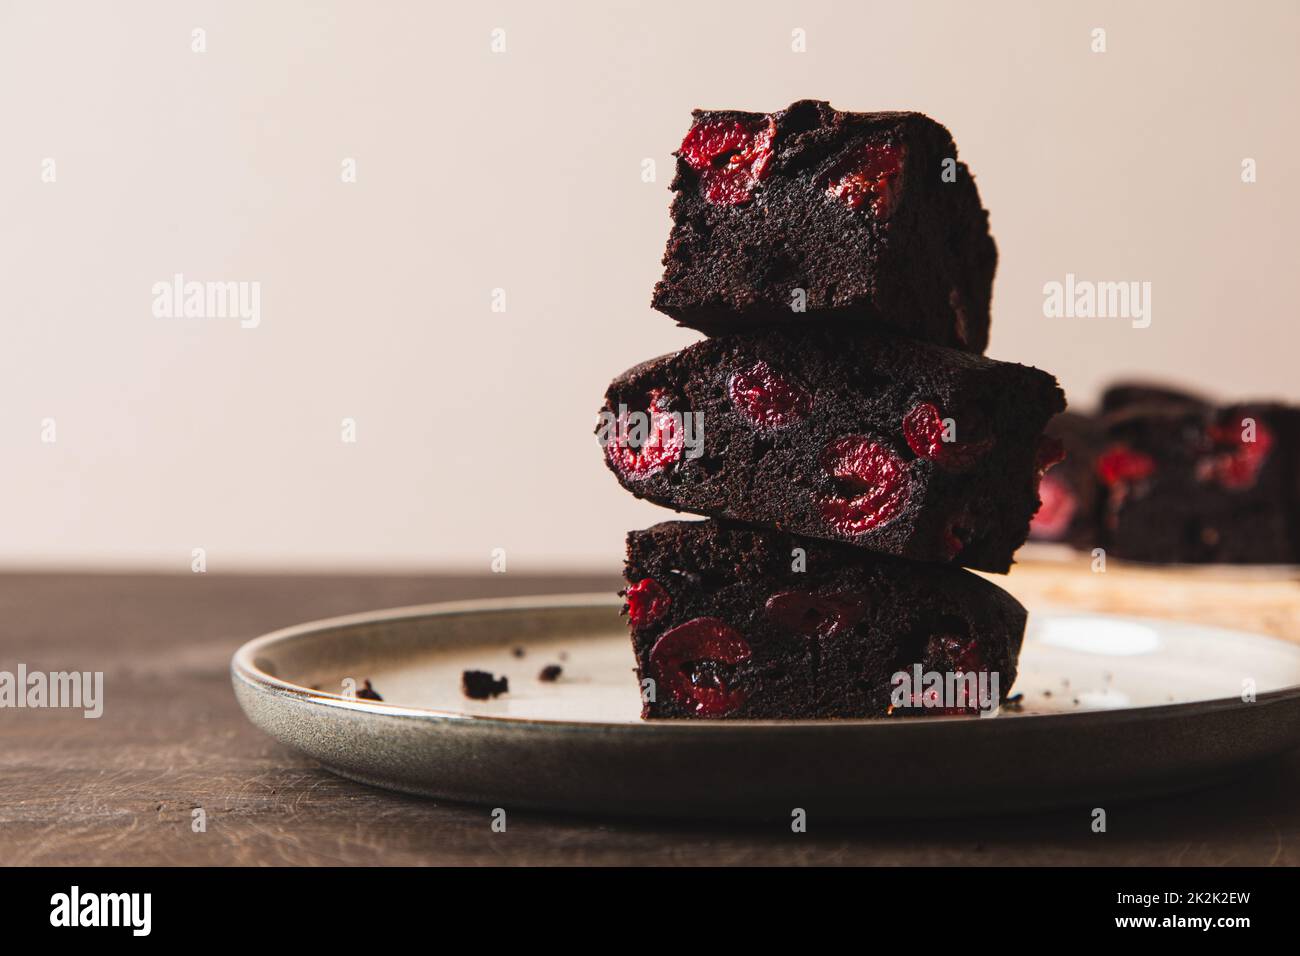 brownie with cherry. A stack of chocolate brownies, homemade bakery and dessert. Bakery, confectionery concept Stock Photo